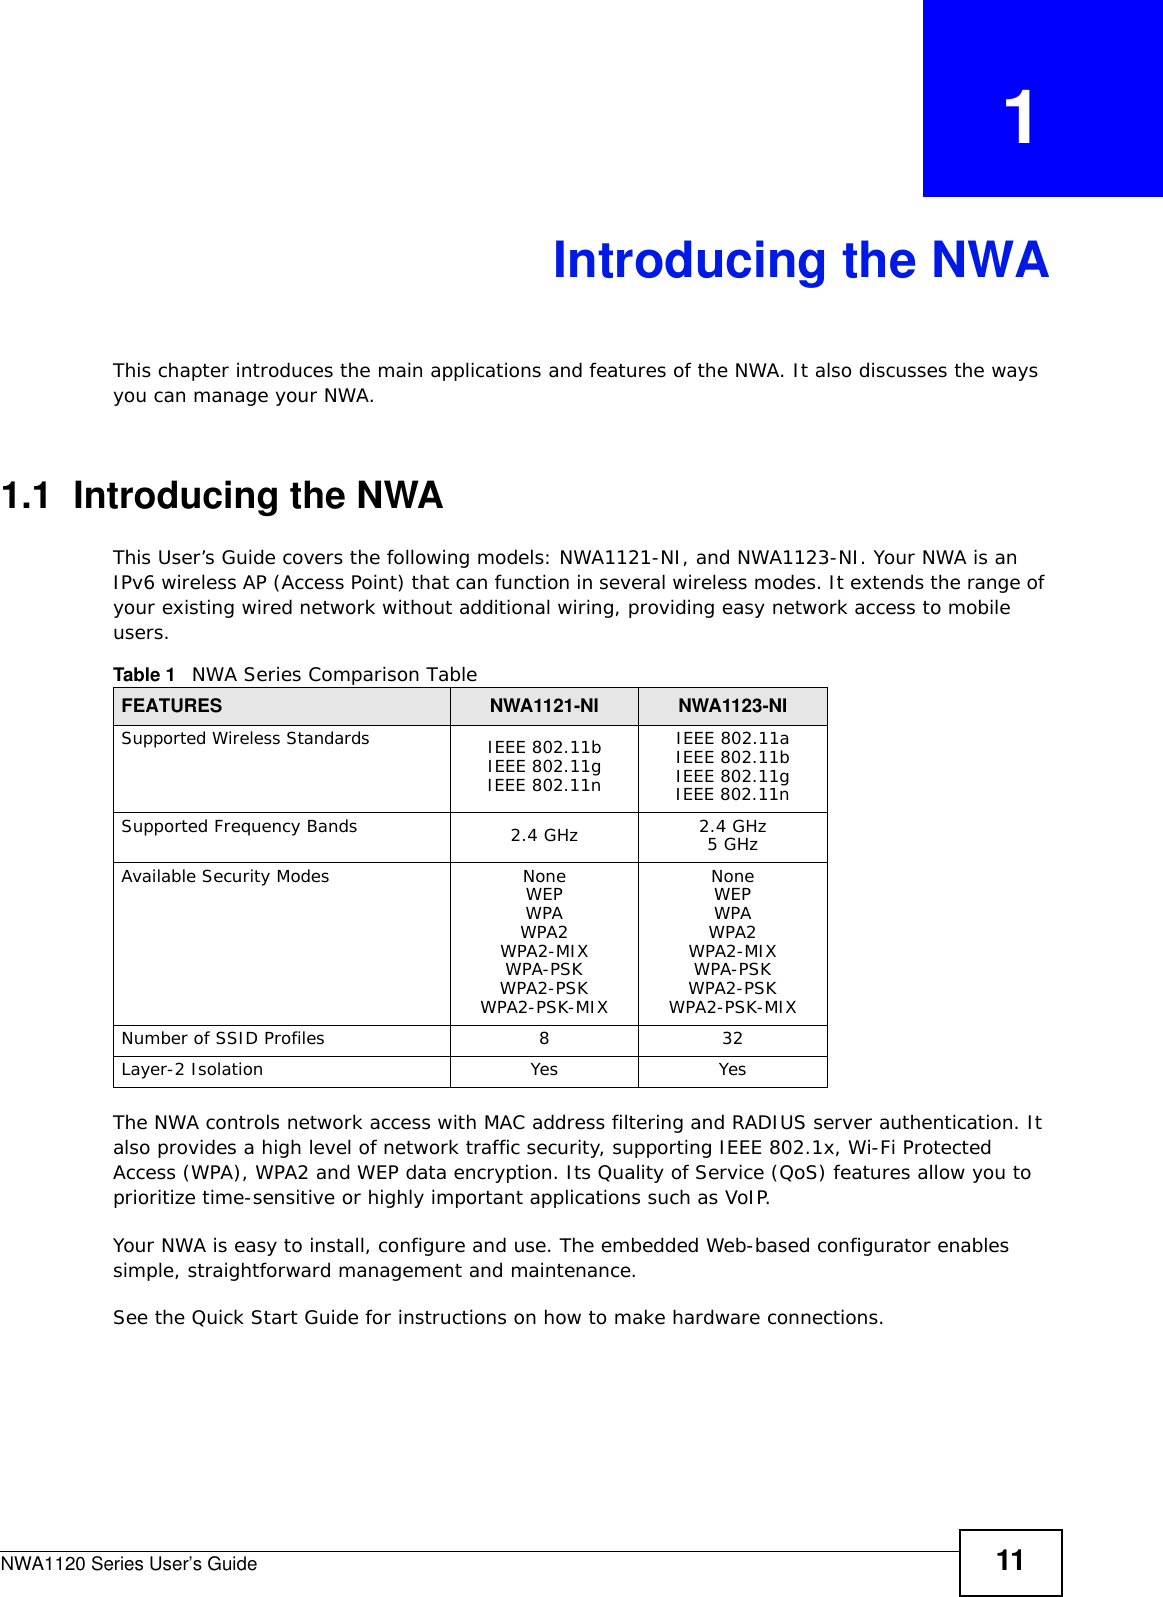 NWA1120 Series User’s Guide 11CHAPTER   1Introducing the NWAThis chapter introduces the main applications and features of the NWA. It also discusses the ways you can manage your NWA.1.1  Introducing the NWA This User’s Guide covers the following models: NWA1121-NI, and NWA1123-NI. Your NWA is an IPv6 wireless AP (Access Point) that can function in several wireless modes. It extends the range of your existing wired network without additional wiring, providing easy network access to mobile users.  The NWA controls network access with MAC address filtering and RADIUS server authentication. It also provides a high level of network traffic security, supporting IEEE 802.1x, Wi-Fi Protected Access (WPA), WPA2 and WEP data encryption. Its Quality of Service (QoS) features allow you to prioritize time-sensitive or highly important applications such as VoIP.Your NWA is easy to install, configure and use. The embedded Web-based configurator enables simple, straightforward management and maintenance.See the Quick Start Guide for instructions on how to make hardware connections.Table 1   NWA Series Comparison TableFEATURES NWA1121-NI NWA1123-NISupported Wireless StandardsIEEE 802.11bIEEE 802.11gIEEE 802.11nIEEE 802.11aIEEE 802.11bIEEE 802.11gIEEE 802.11nSupported Frequency Bands 2.4 GHz 2.4 GHz5 GHzAvailable Security Modes NoneWEPWPAWPA2WPA2-MIXWPA-PSKWPA2-PSKWPA2-PSK-MIXNoneWEPWPAWPA2WPA2-MIXWPA-PSKWPA2-PSKWPA2-PSK-MIXNumber of SSID Profiles 8 32Layer-2 Isolation Yes Yes